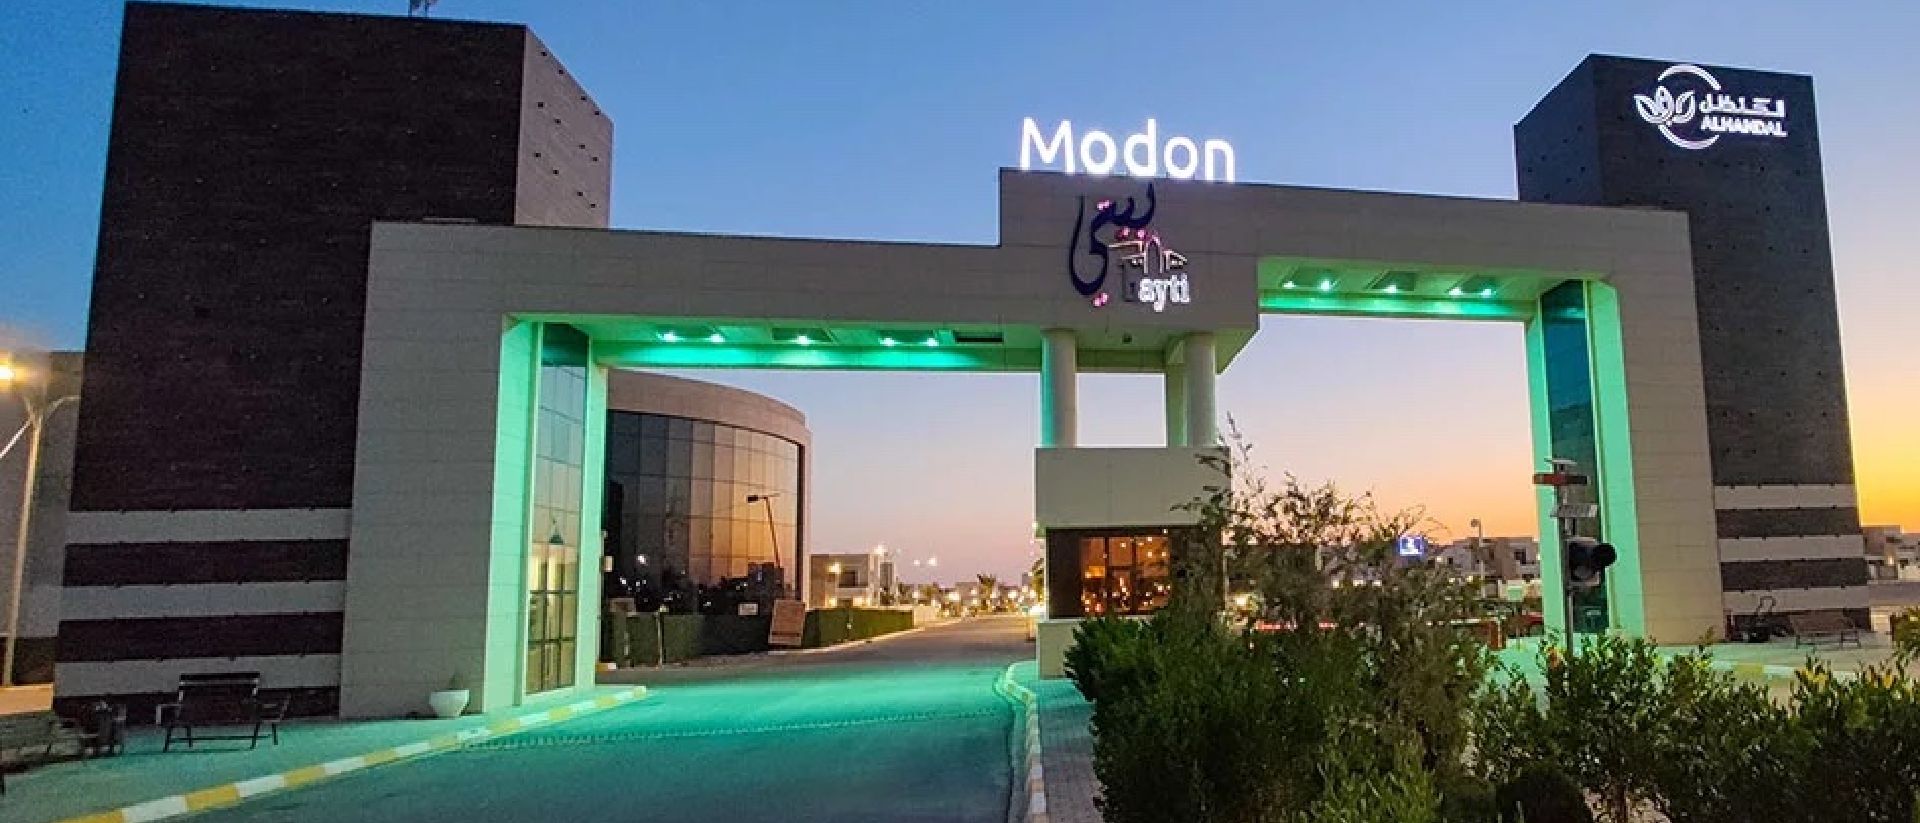 Modon Real Estate Development Unveils the Final Phase of Bayti Residential Complex in Tikrit